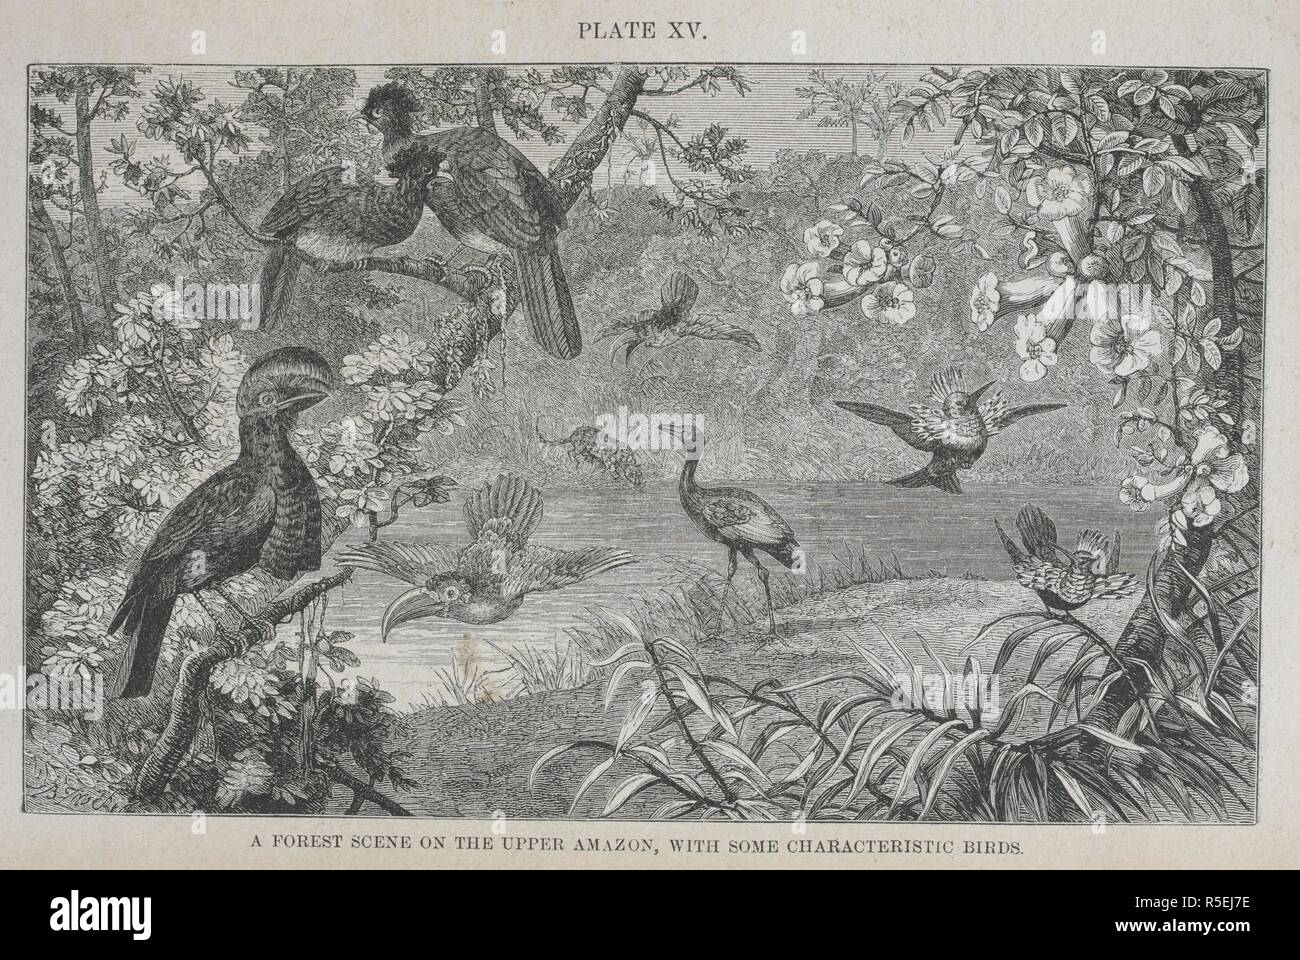 A forest scene on the upper Amazon, with some characteristic birds. The Geographical Distribution of Animals, with a study of the relations of living and extinct faunas as elucidating the past changes of the earth's surface. ... . London, 1876. Source: 07209.dd.1 plate XV. Author: WALLACE, ALFRED RUSSEL. Stock Photo